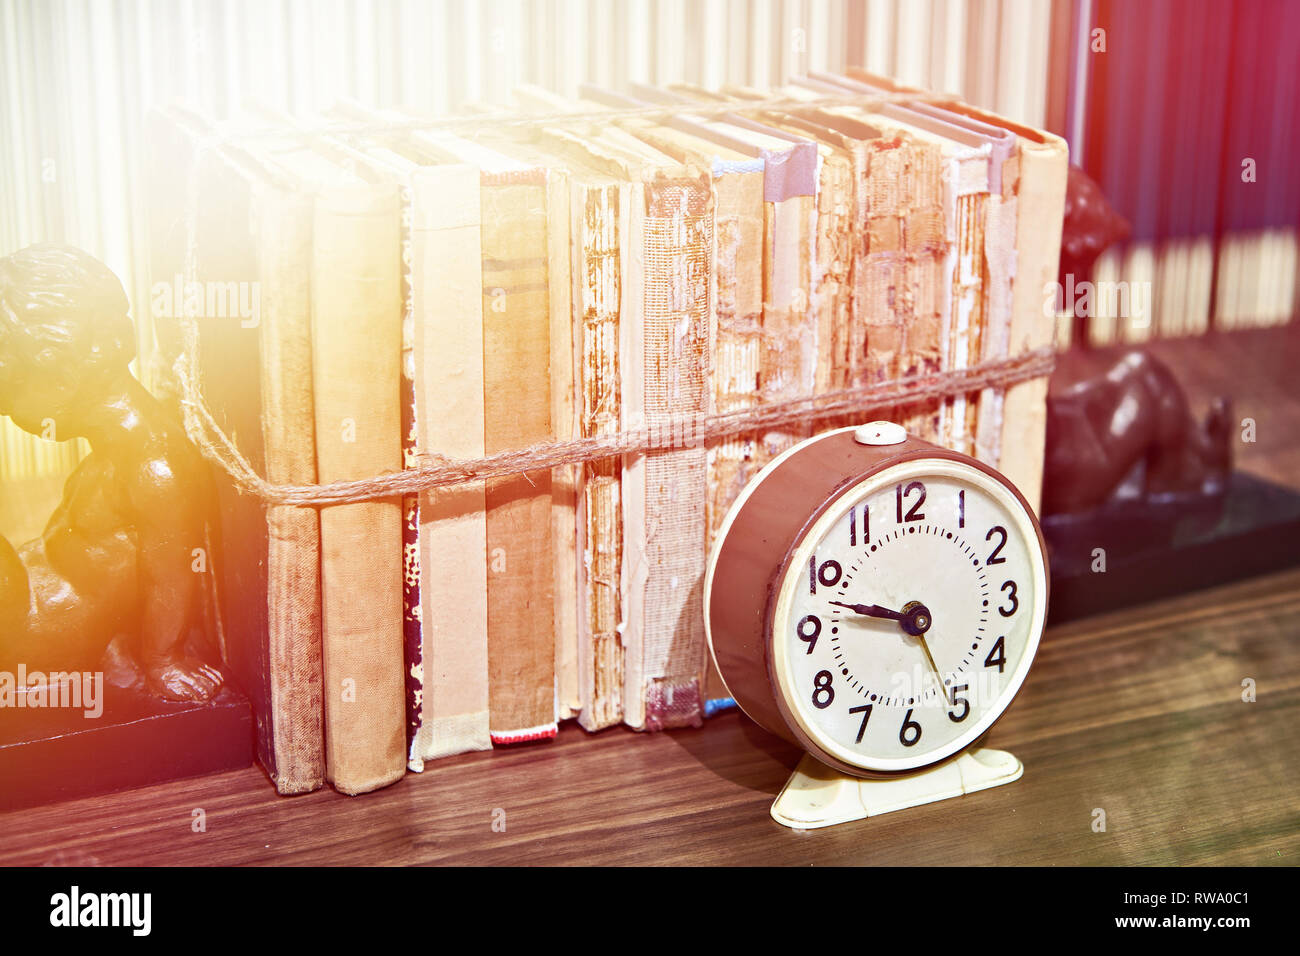 Old books tied up with rope on shelf and alarm clock Stock Photo